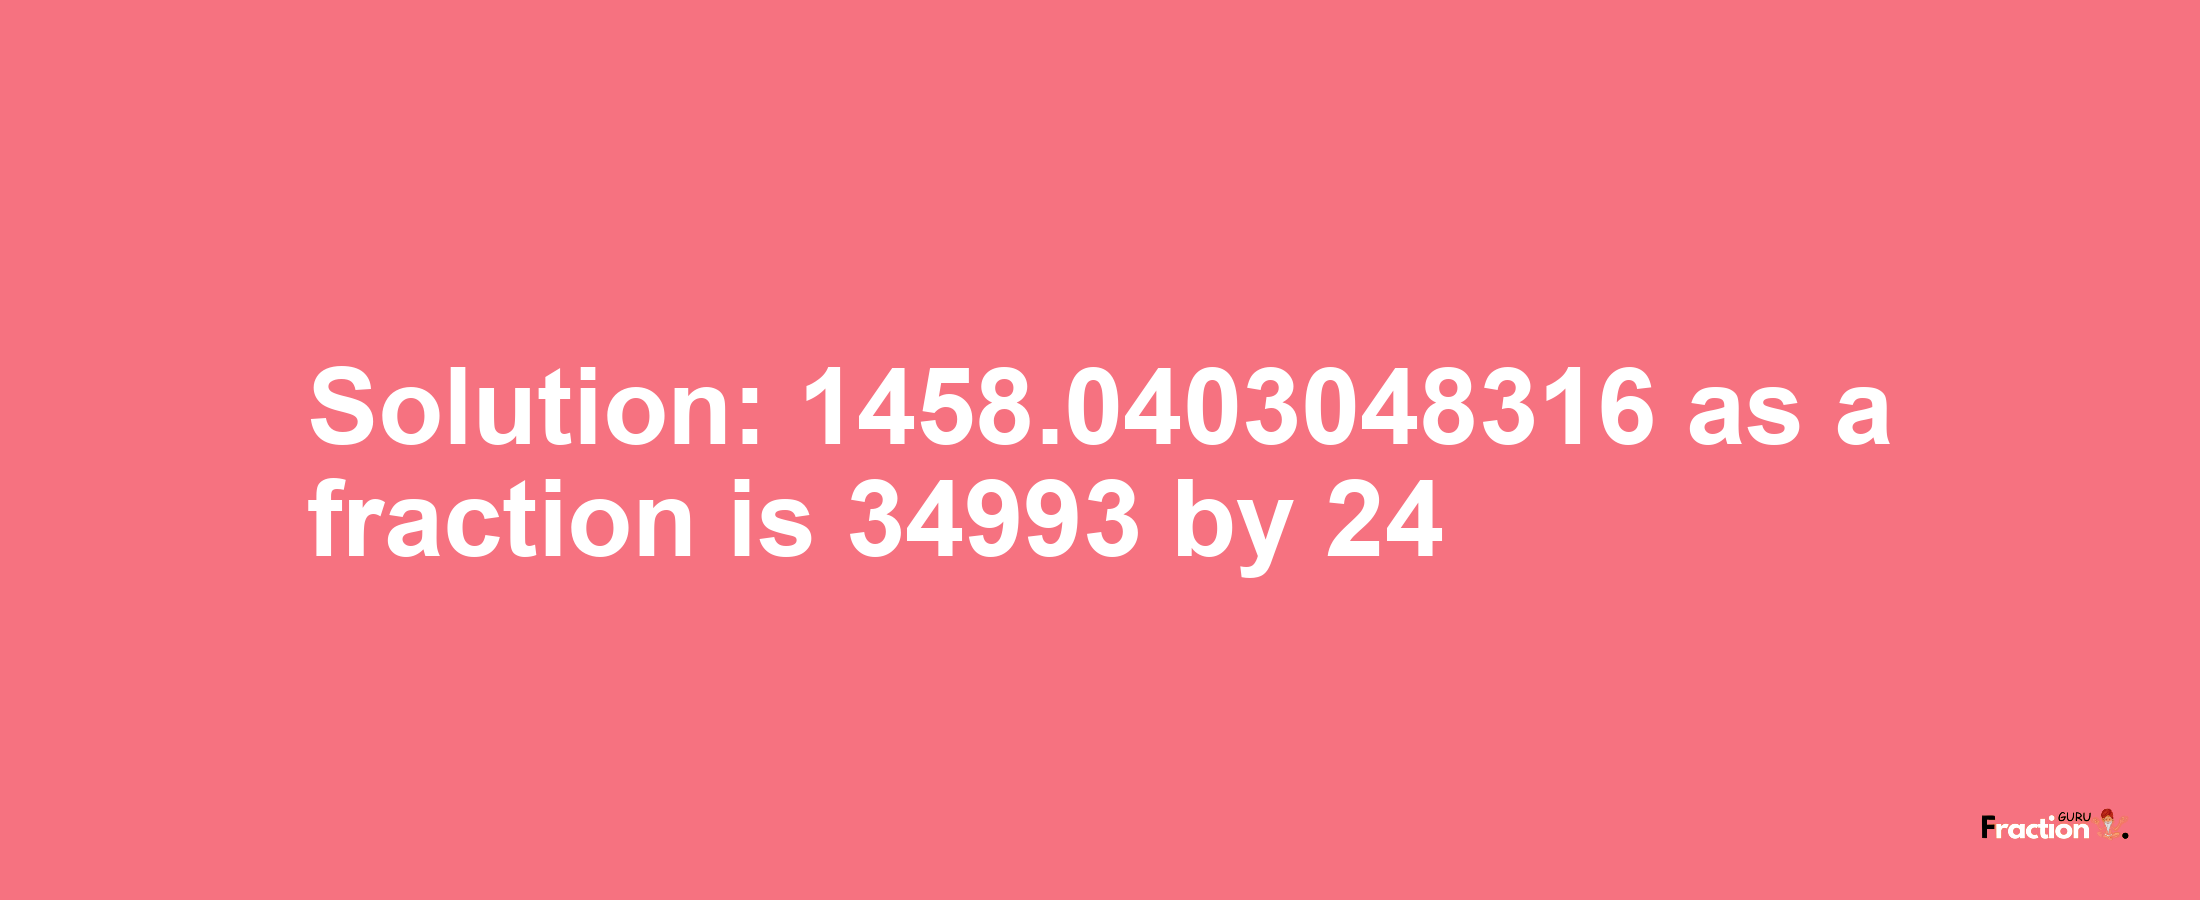 Solution:1458.0403048316 as a fraction is 34993/24